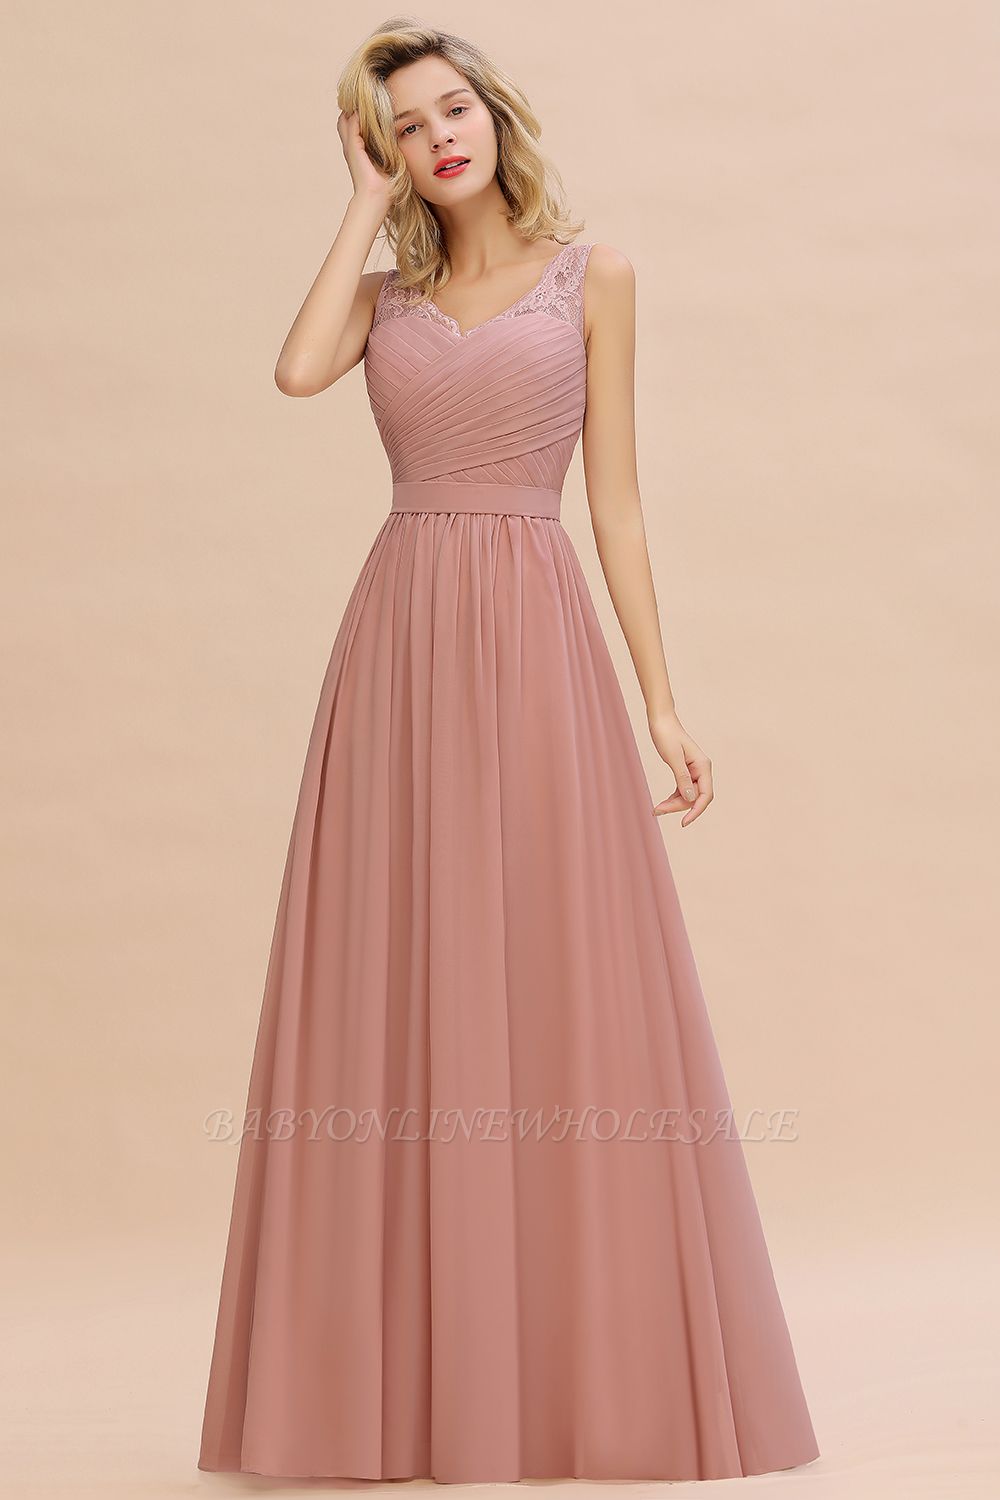 Beautiful V-neck Long Evening Dresses with soft Pleats | Sexy Sleeveless V-back Dusty Pink Womens Dress for Prom